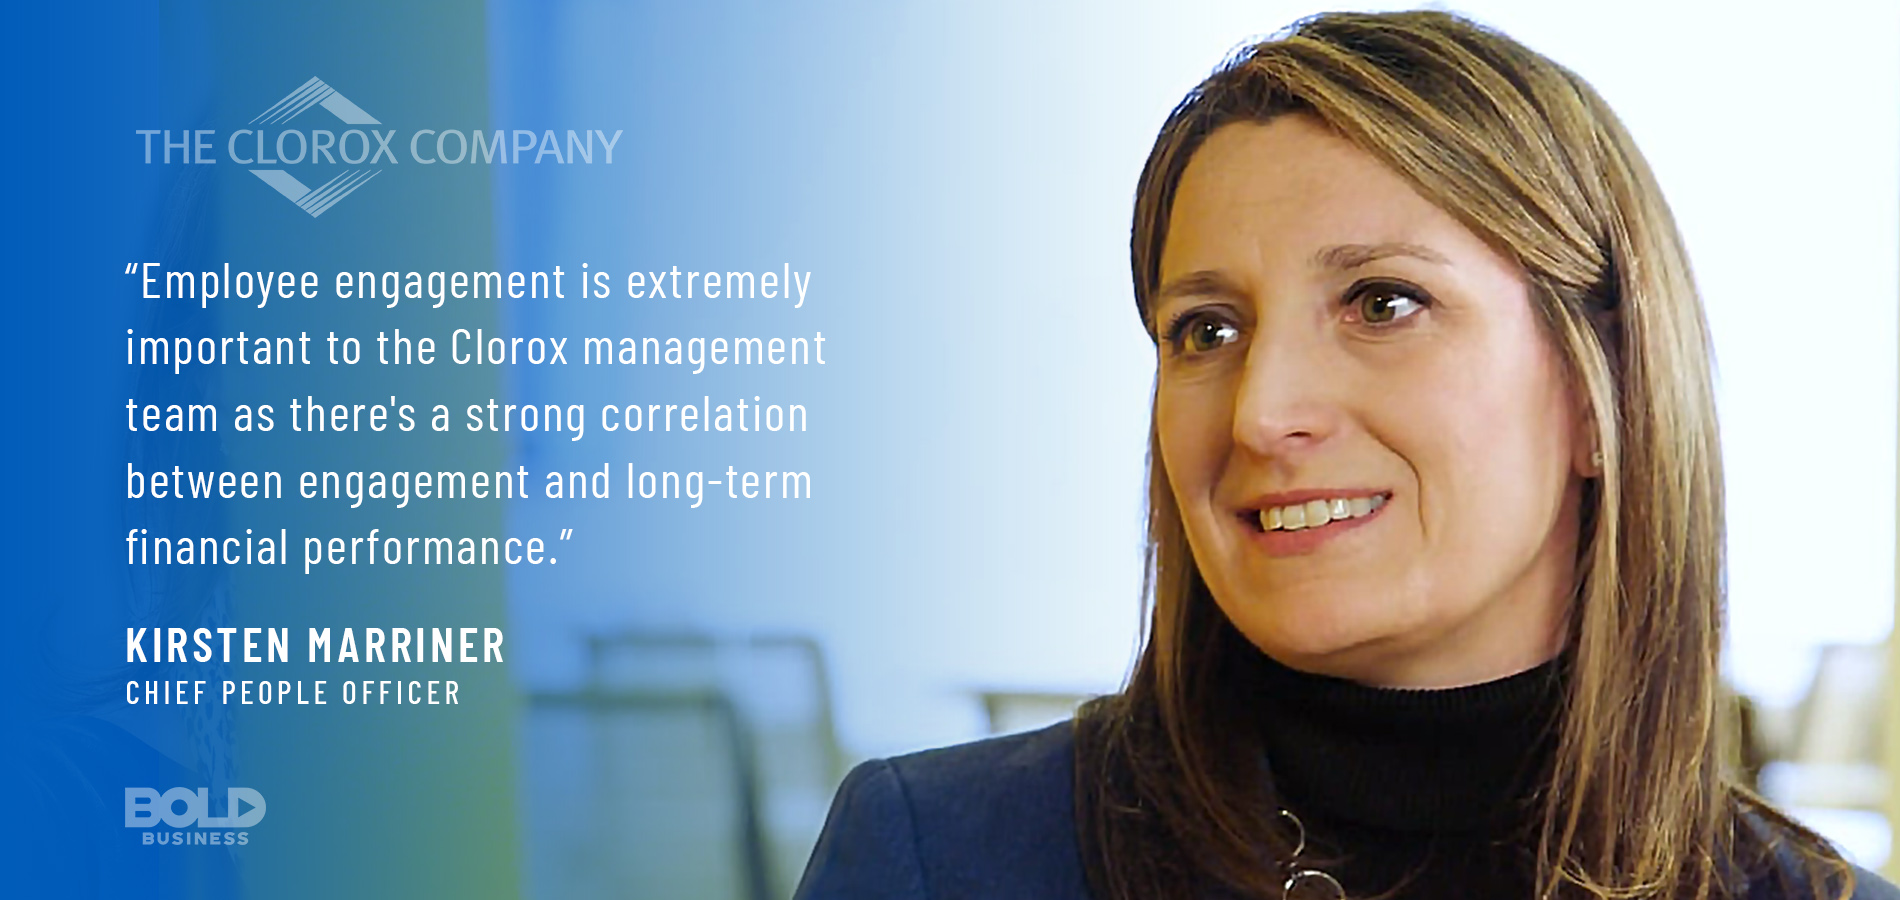 As a bold leader, Kirsten Marriner has made sure the Clorox Company's employees feel empowered.